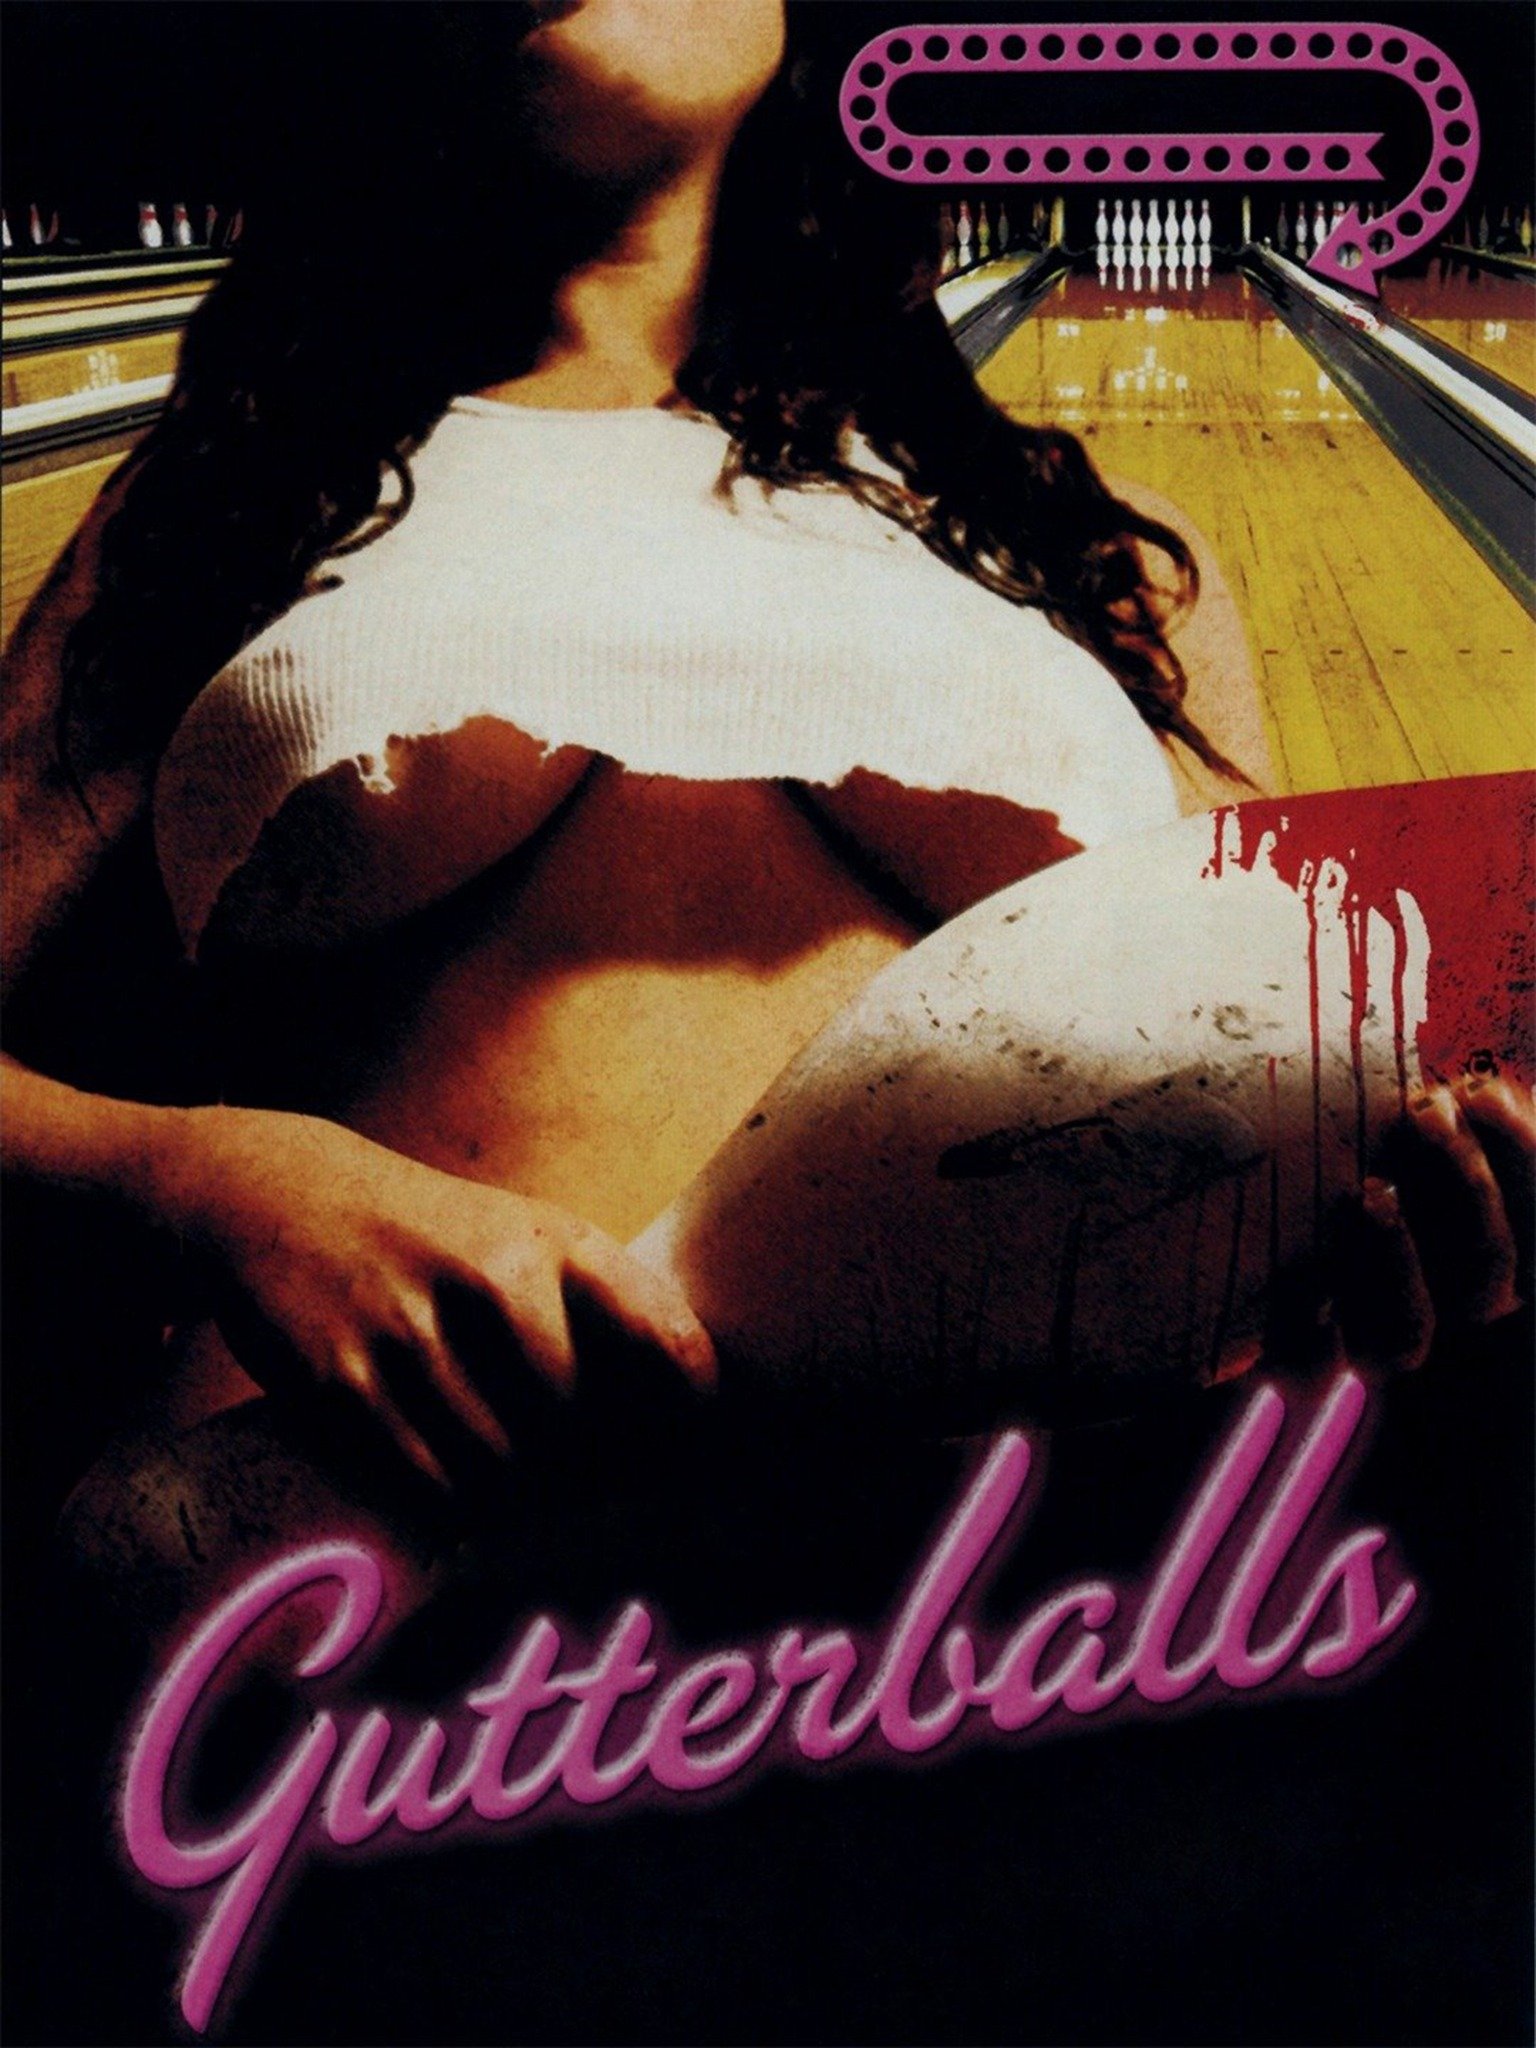 Gutterballs picture